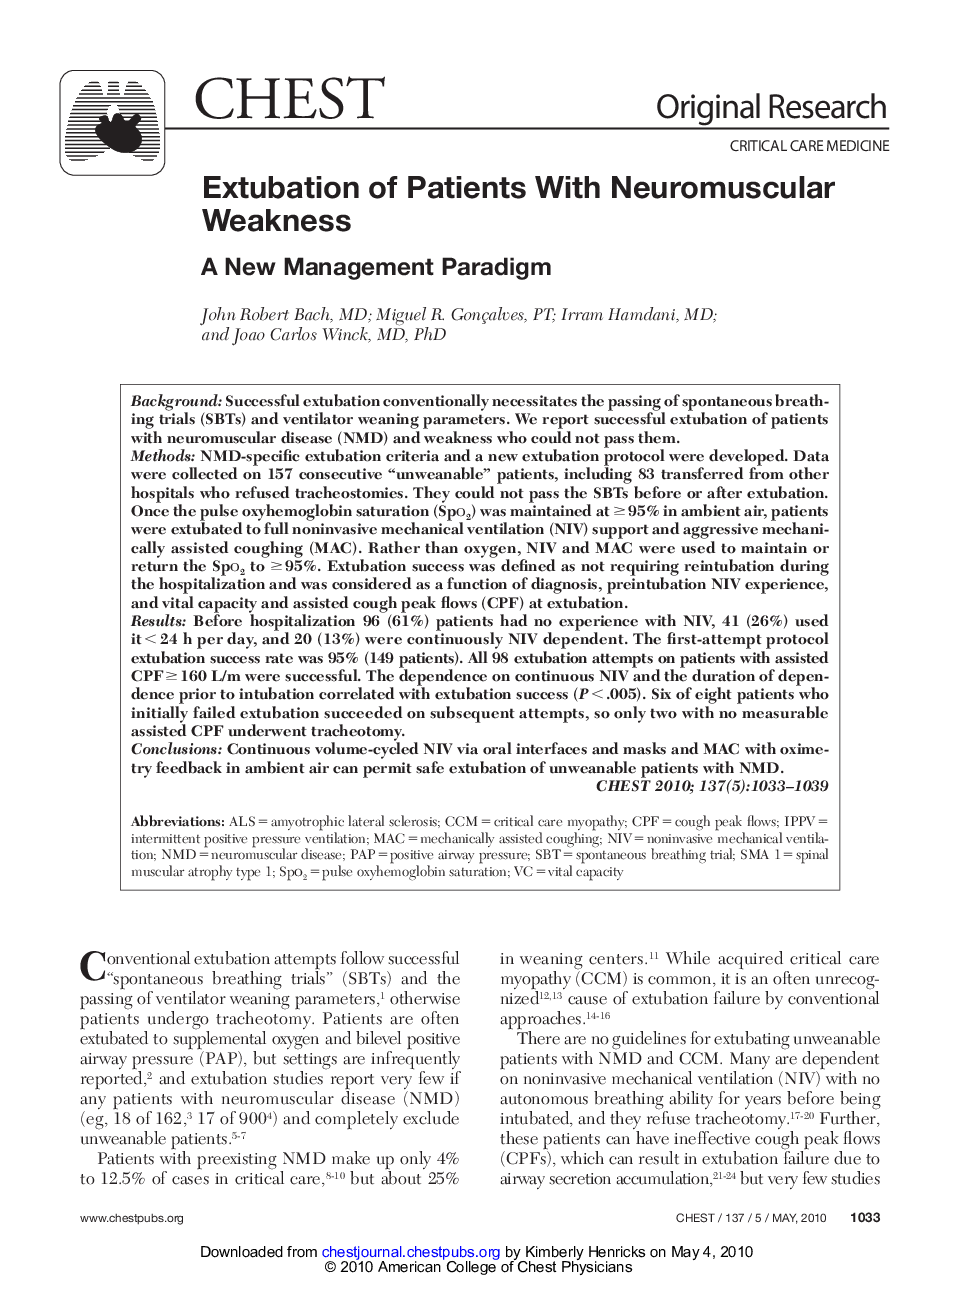 Extubation of Patients With Neuromuscular Weakness